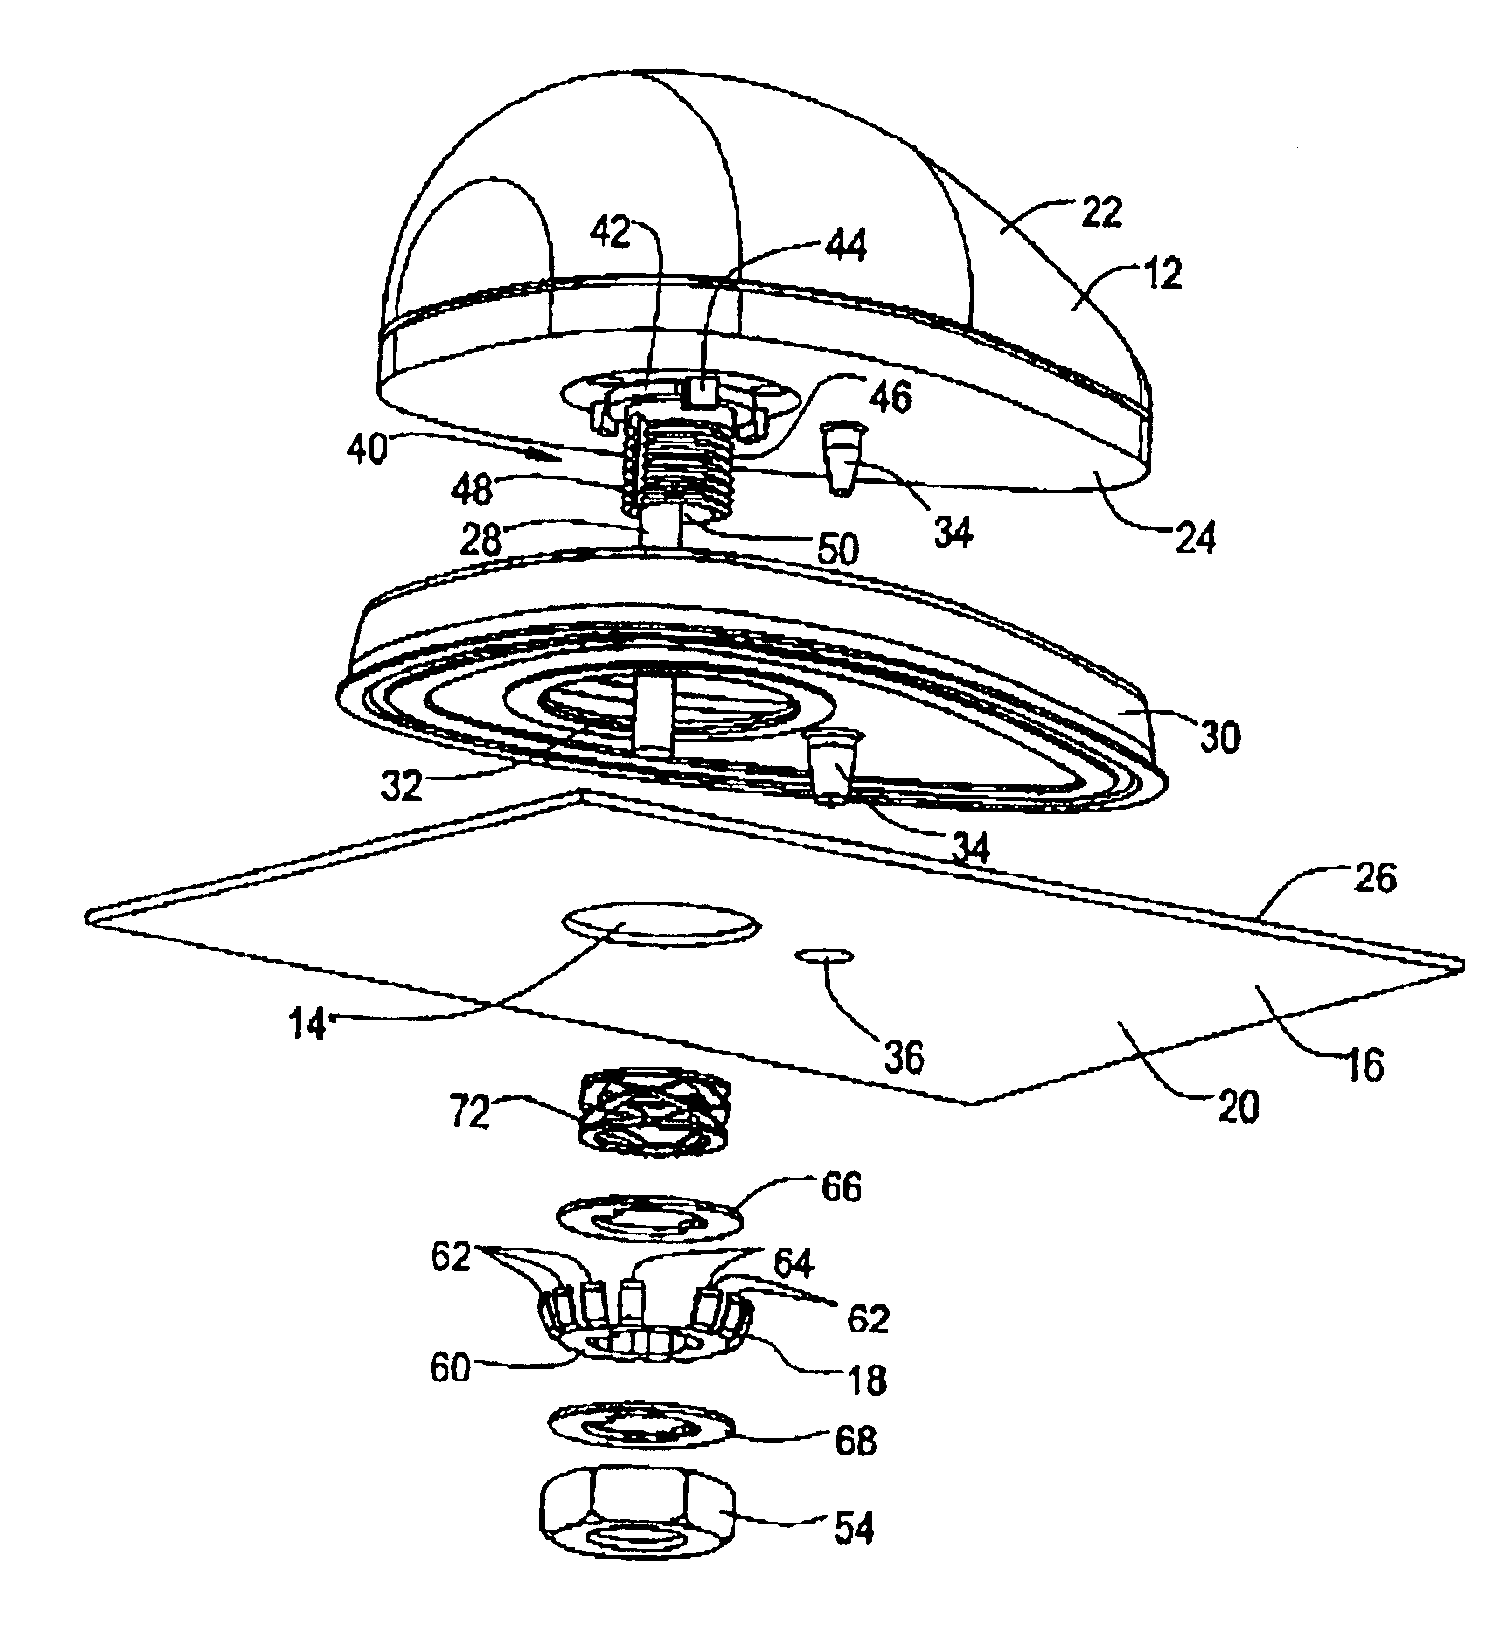 Apparatus and articles of manufacture for an automotive antenna mounting gasket